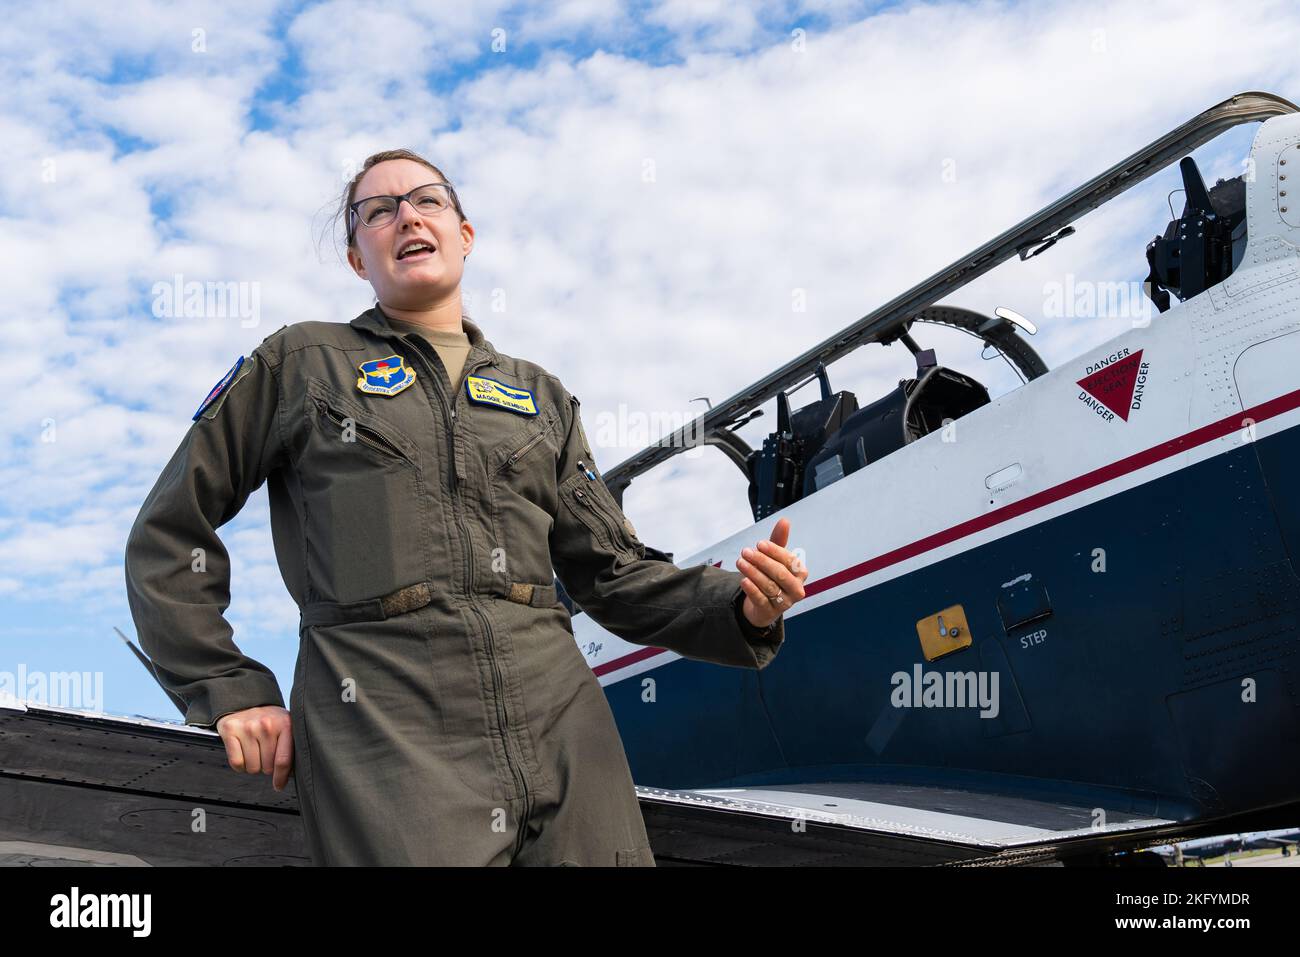 https://c8.alamy.com/comp/2KFYMDR/us-air-force-capt-maggie-siembida-85th-flying-training-squadron-instructor-pilot-speaks-during-an-aviation-inspiration-mentorship-event-at-macdill-air-force-base-florida-oct-15-2022-aim-is-a-community-outreach-program-with-a-mission-to-inform-influence-and-inspire-the-next-generation-of-air-force-aviators-macdill-hosted-naval-sea-cadets-with-the-american-victory-division-university-of-central-florida-rotc-cadets-and-local-hillsborough-county-students-during-the-event-2KFYMDR.jpg